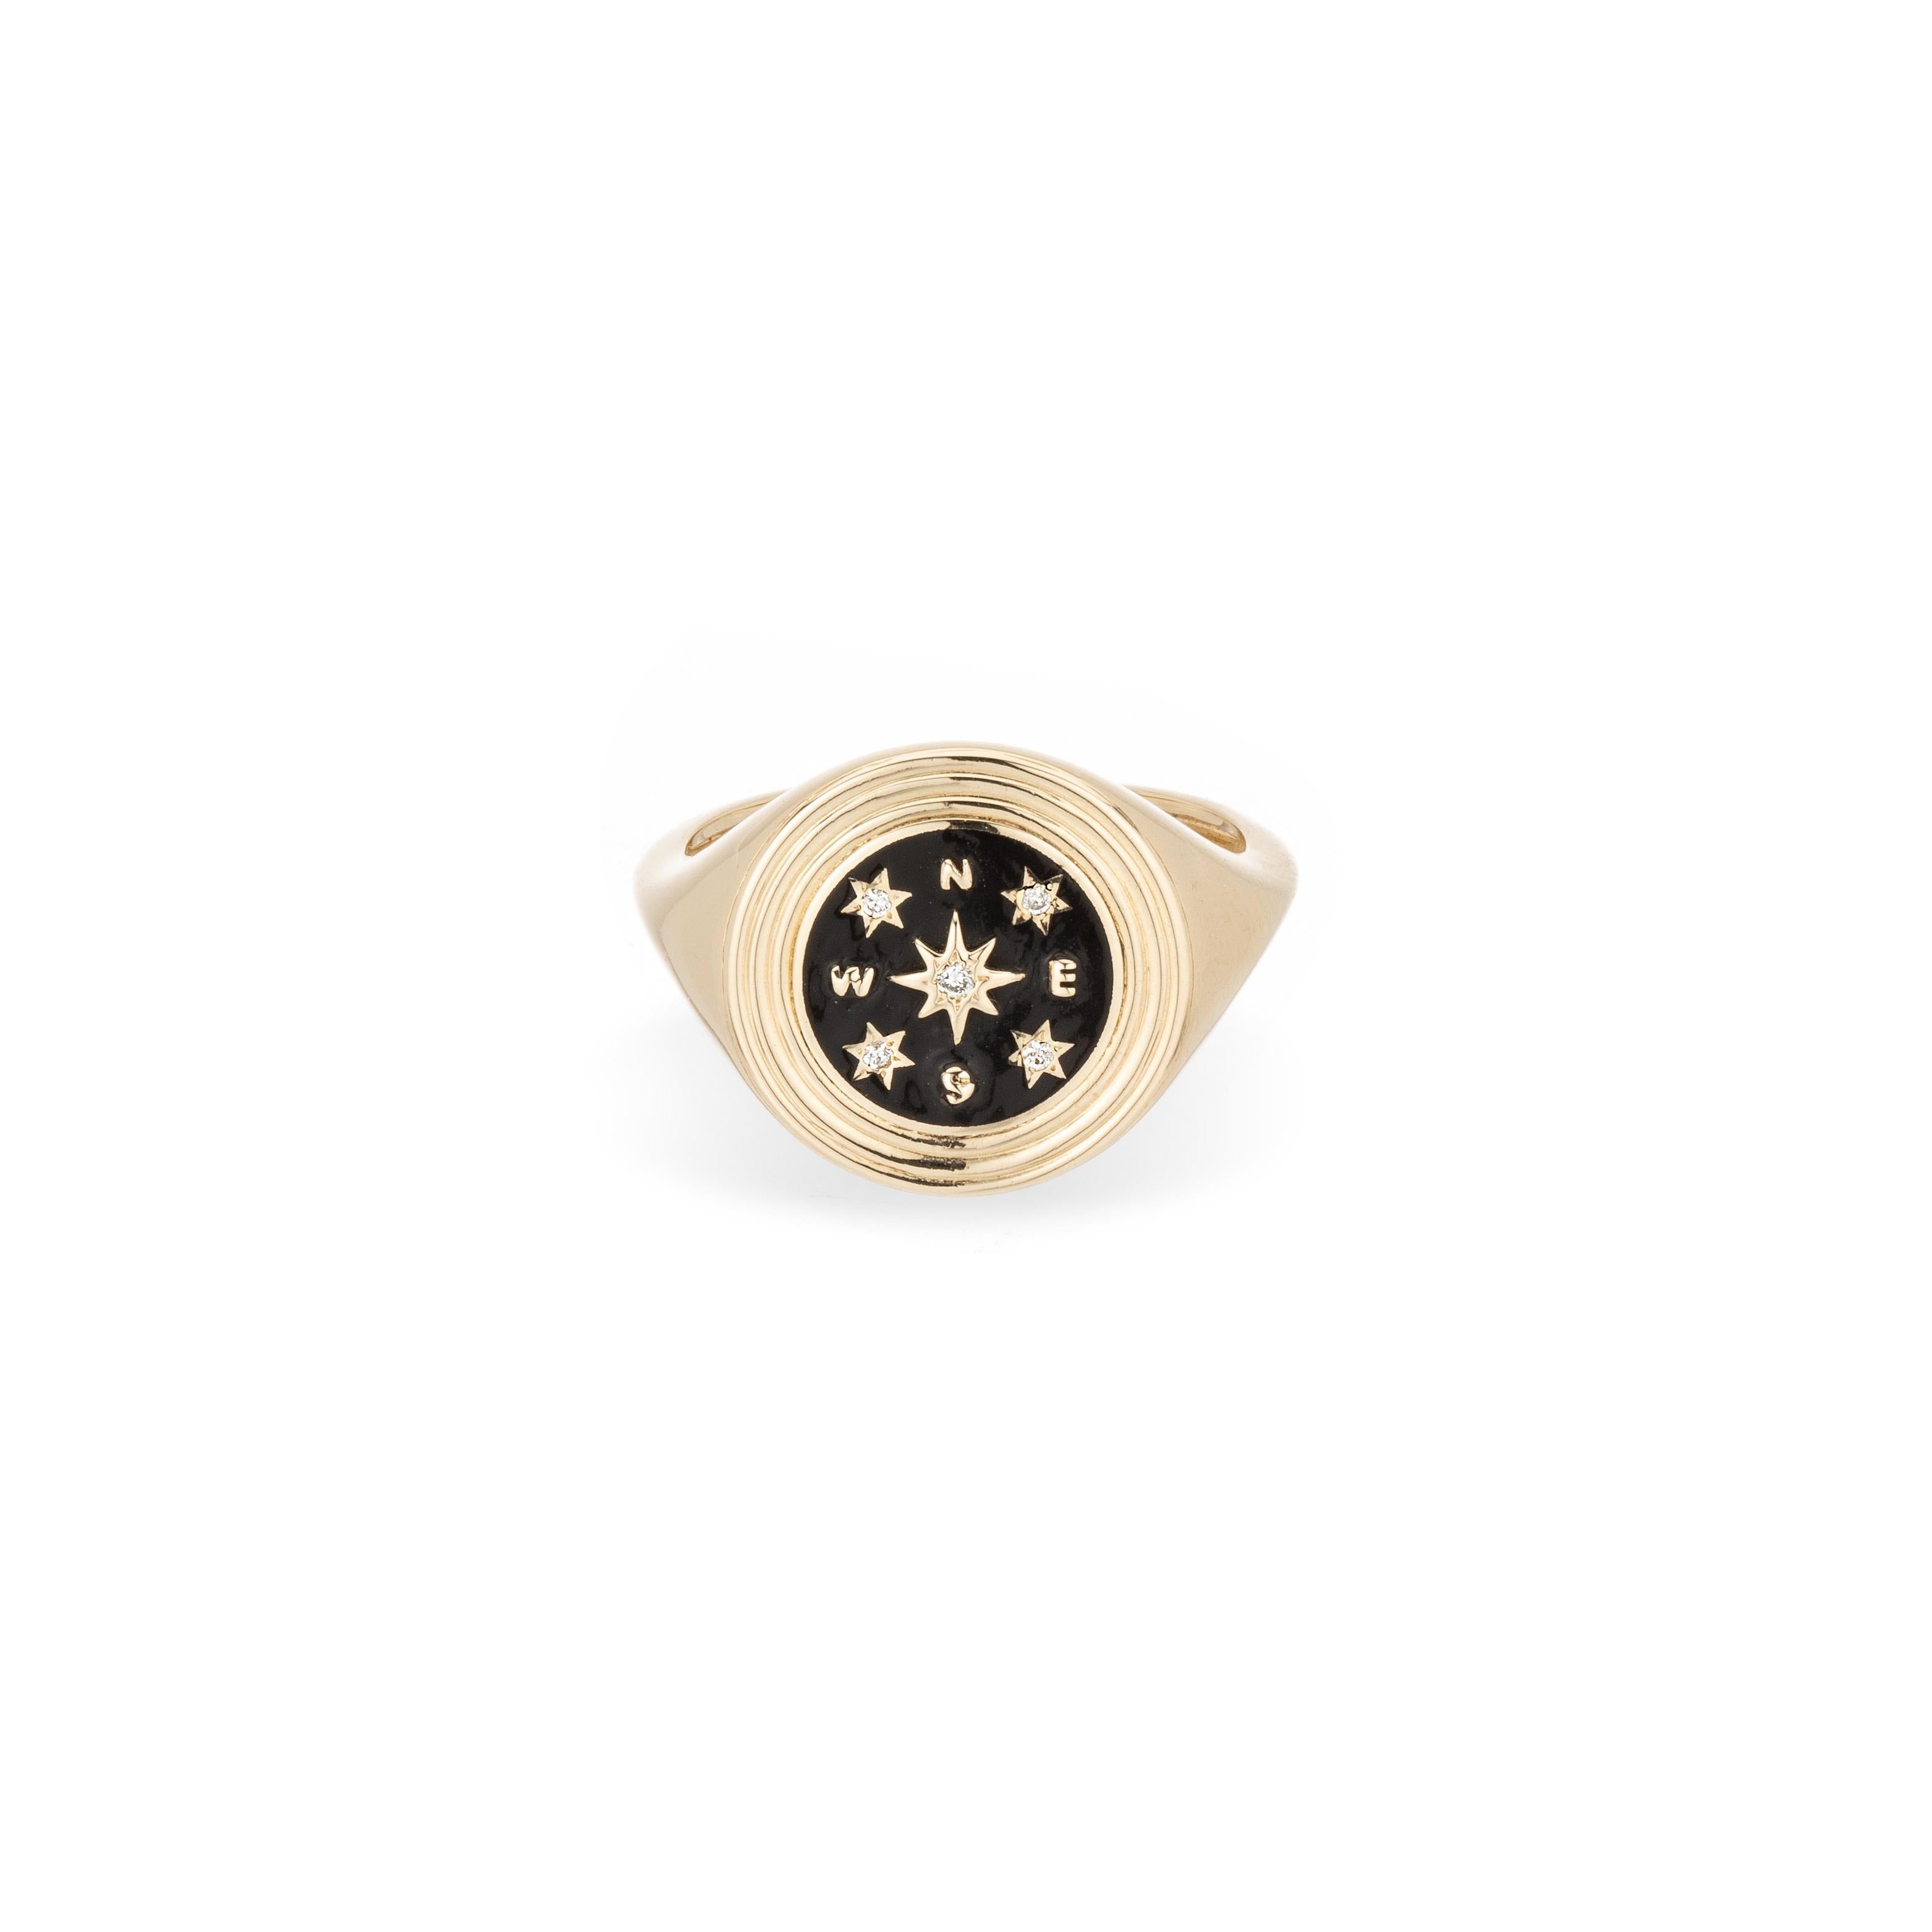 Adina Reyter One of a Kind Compass Ceramic + Diamond Signet Ring - Y14, Size 6

14k yellow gold and black ceramic signet ring with a compass symbol, embellished with hand-set pavé diamond stars. You're always pointing North with this compass